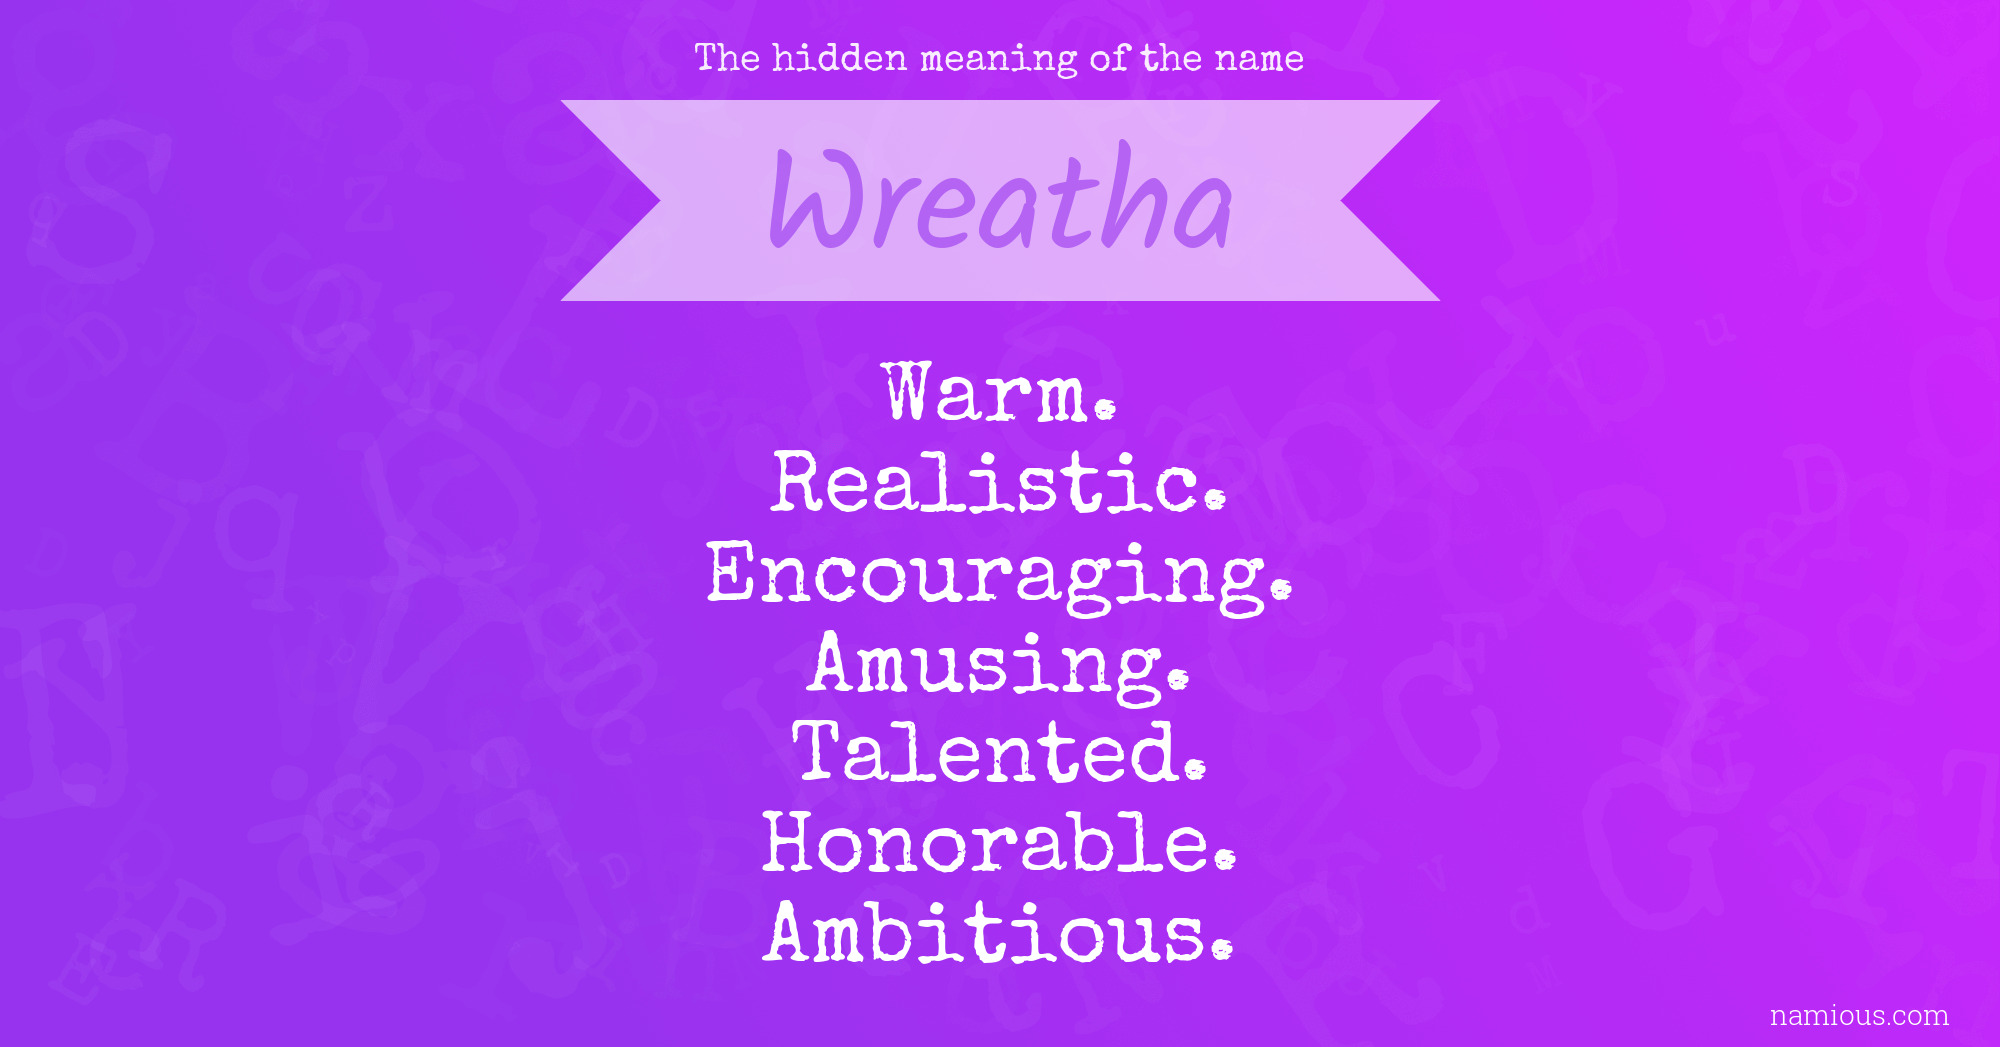 The hidden meaning of the name Wreatha